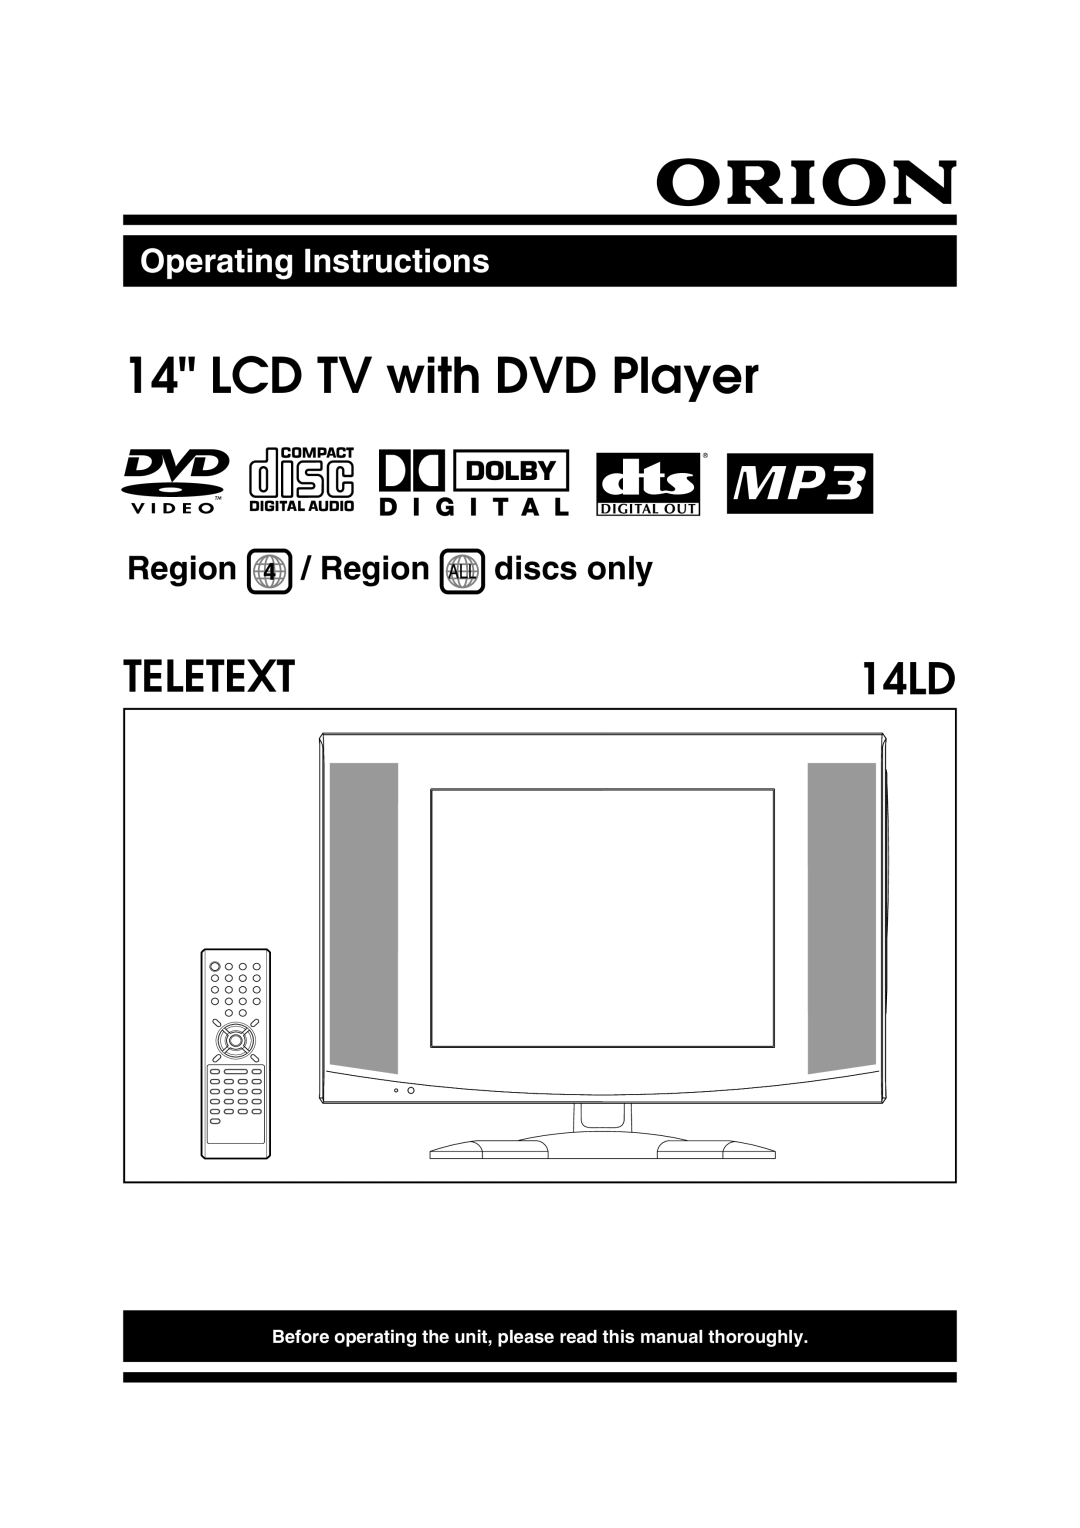 Orion 14LD manual LCD TV with DVD Player 